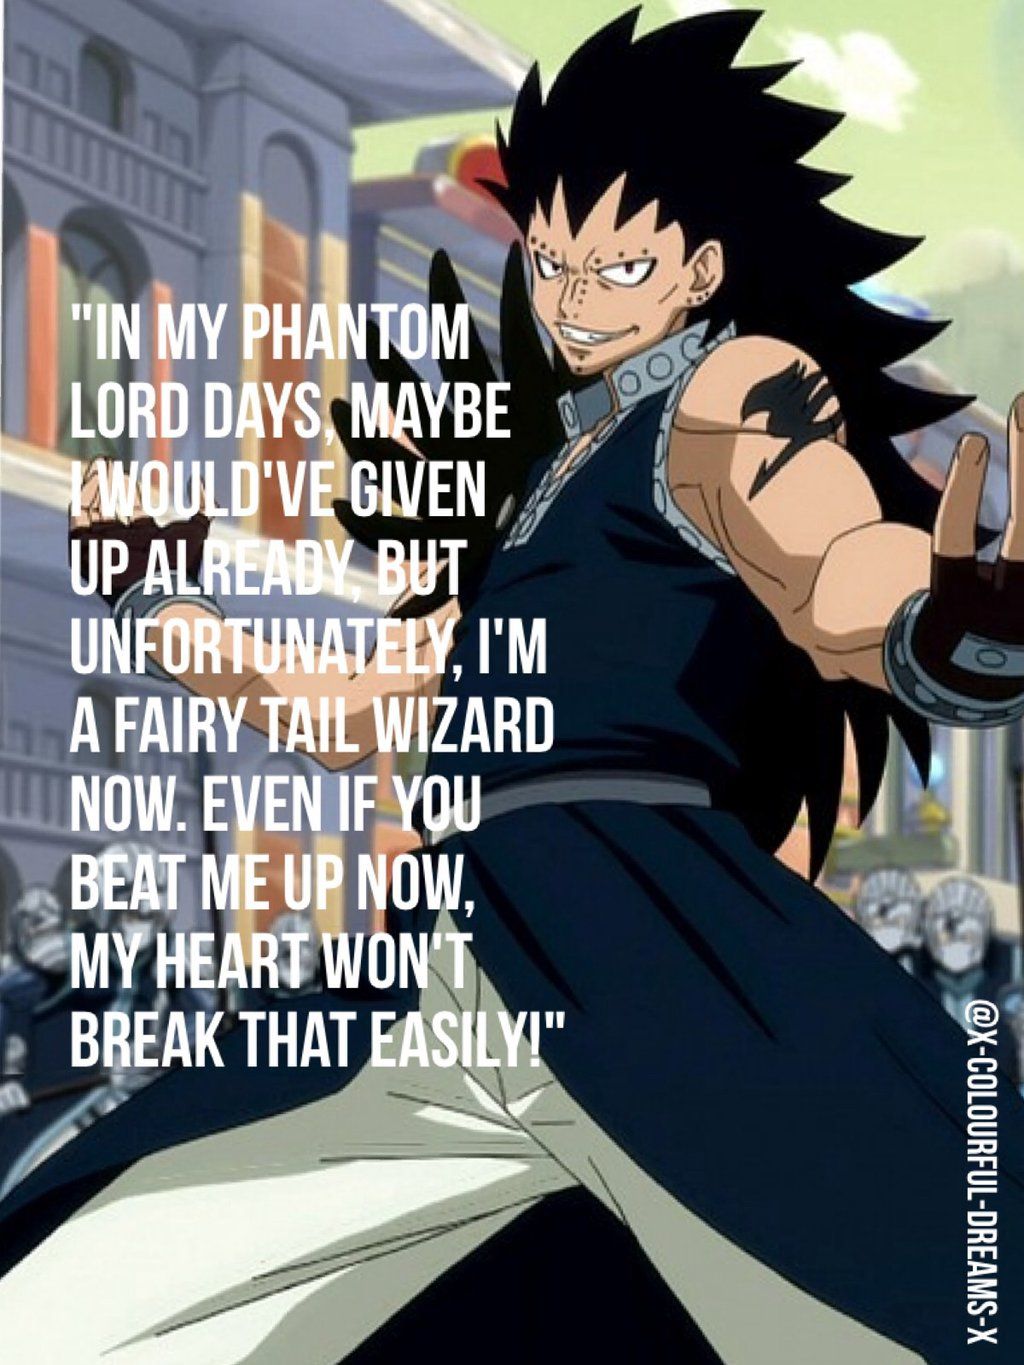 wallpaper fairy tail qoutes tail, Fairy tail quotes, Fairy tail guild